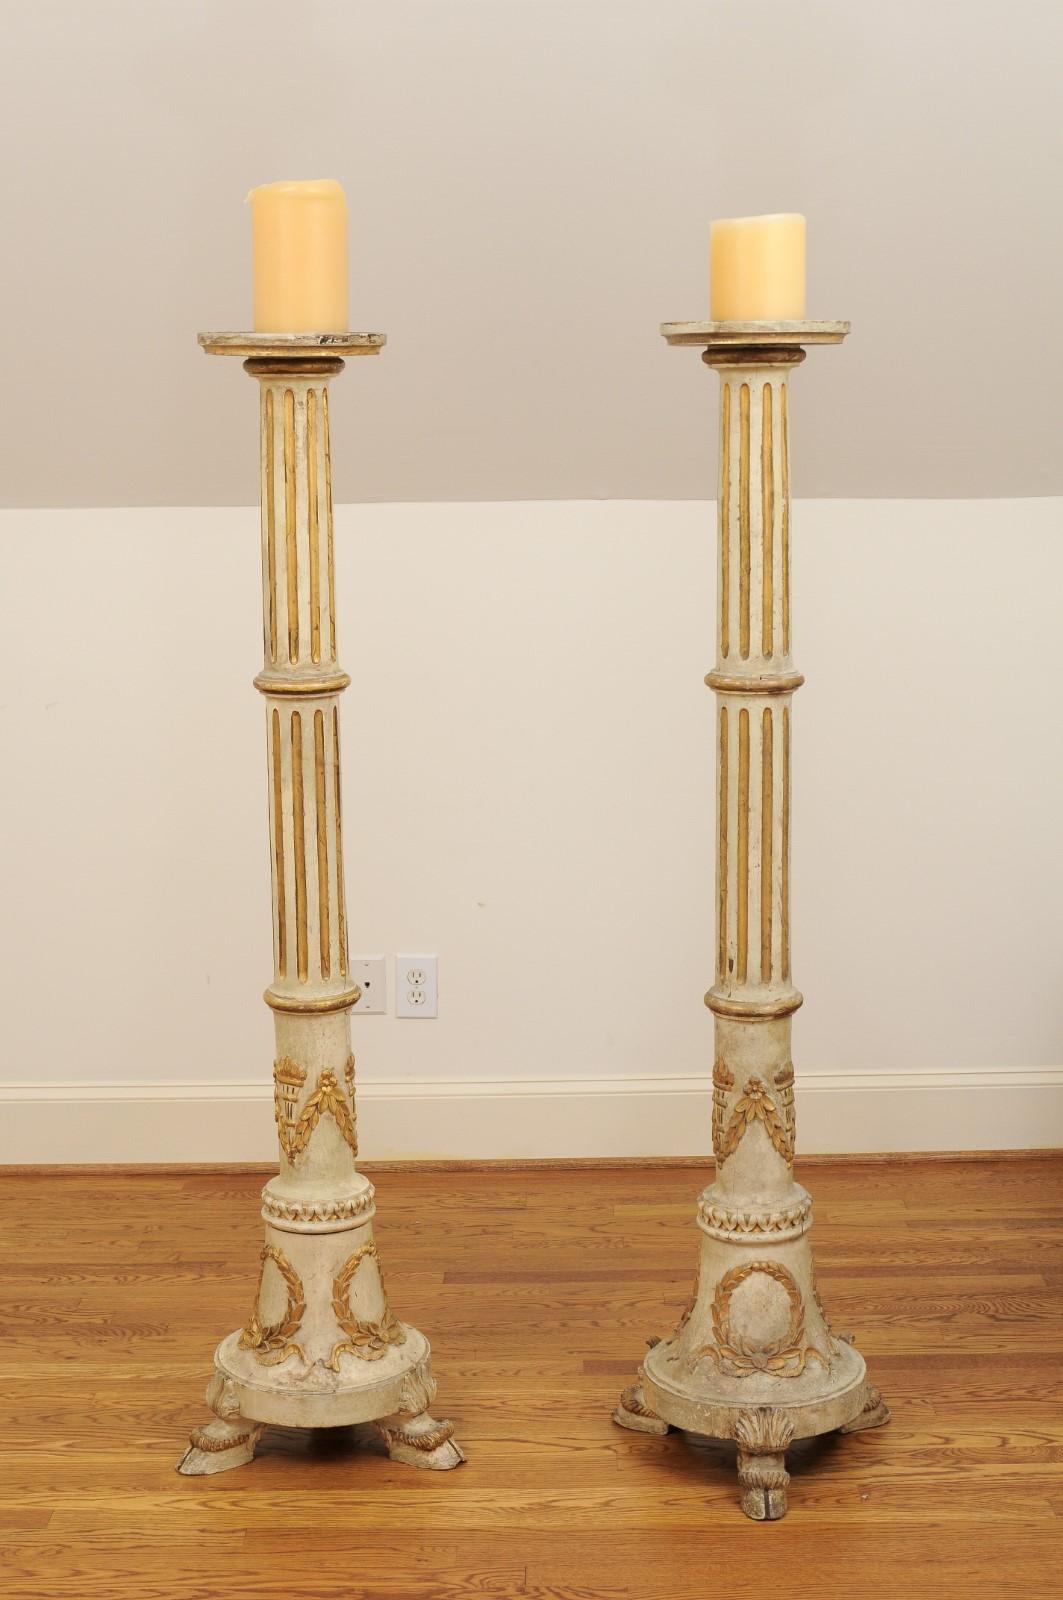 36 inch floor candle holders